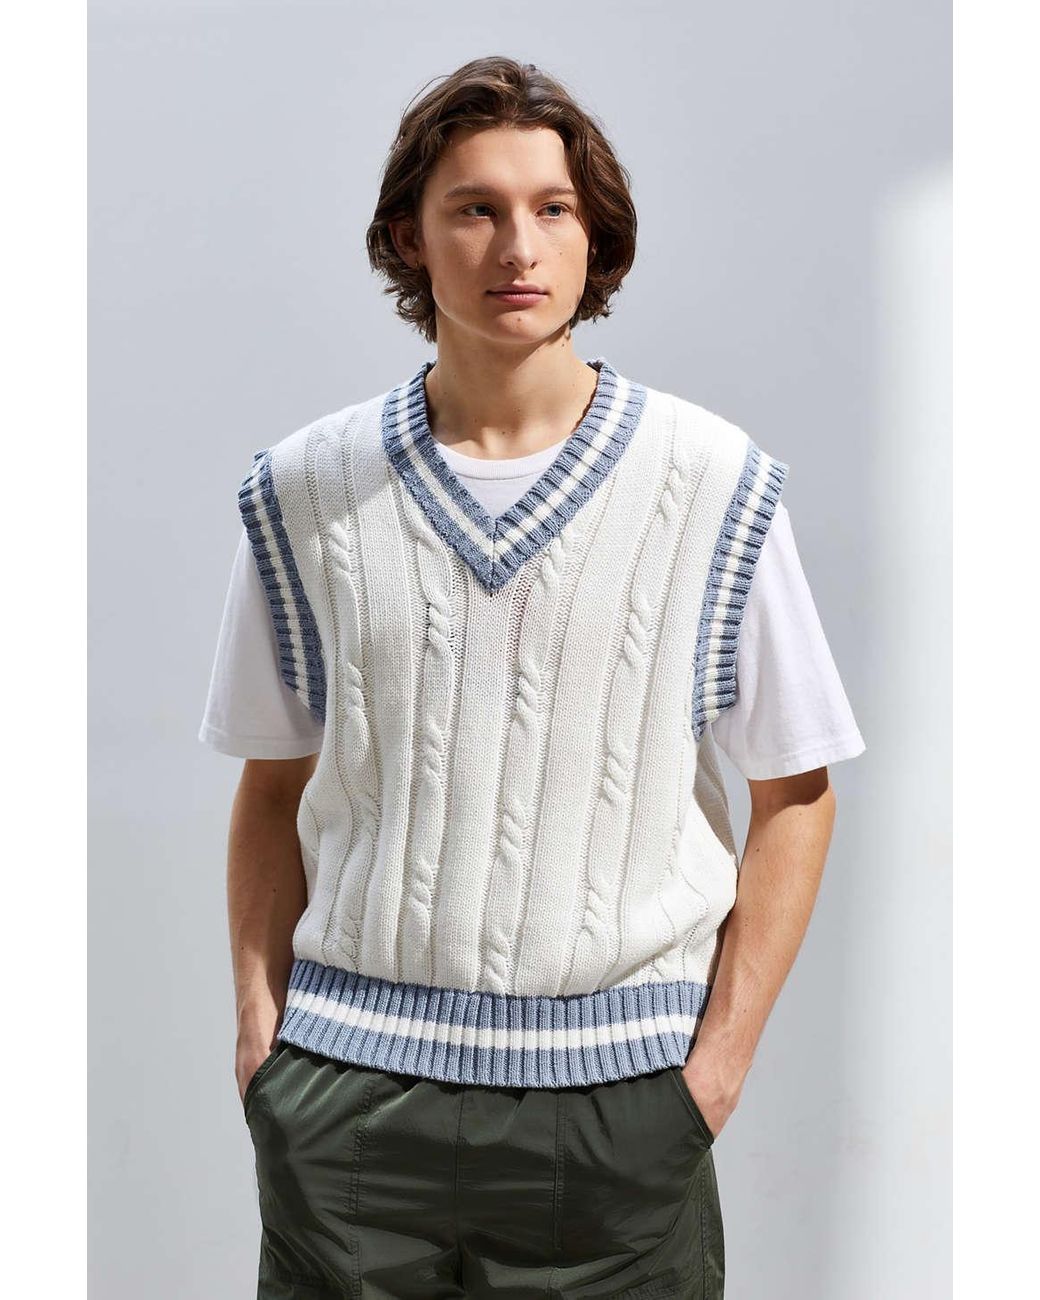 Urban Outfitters Cotton Uo Otto Sweater Vest in White for Men | Lyst